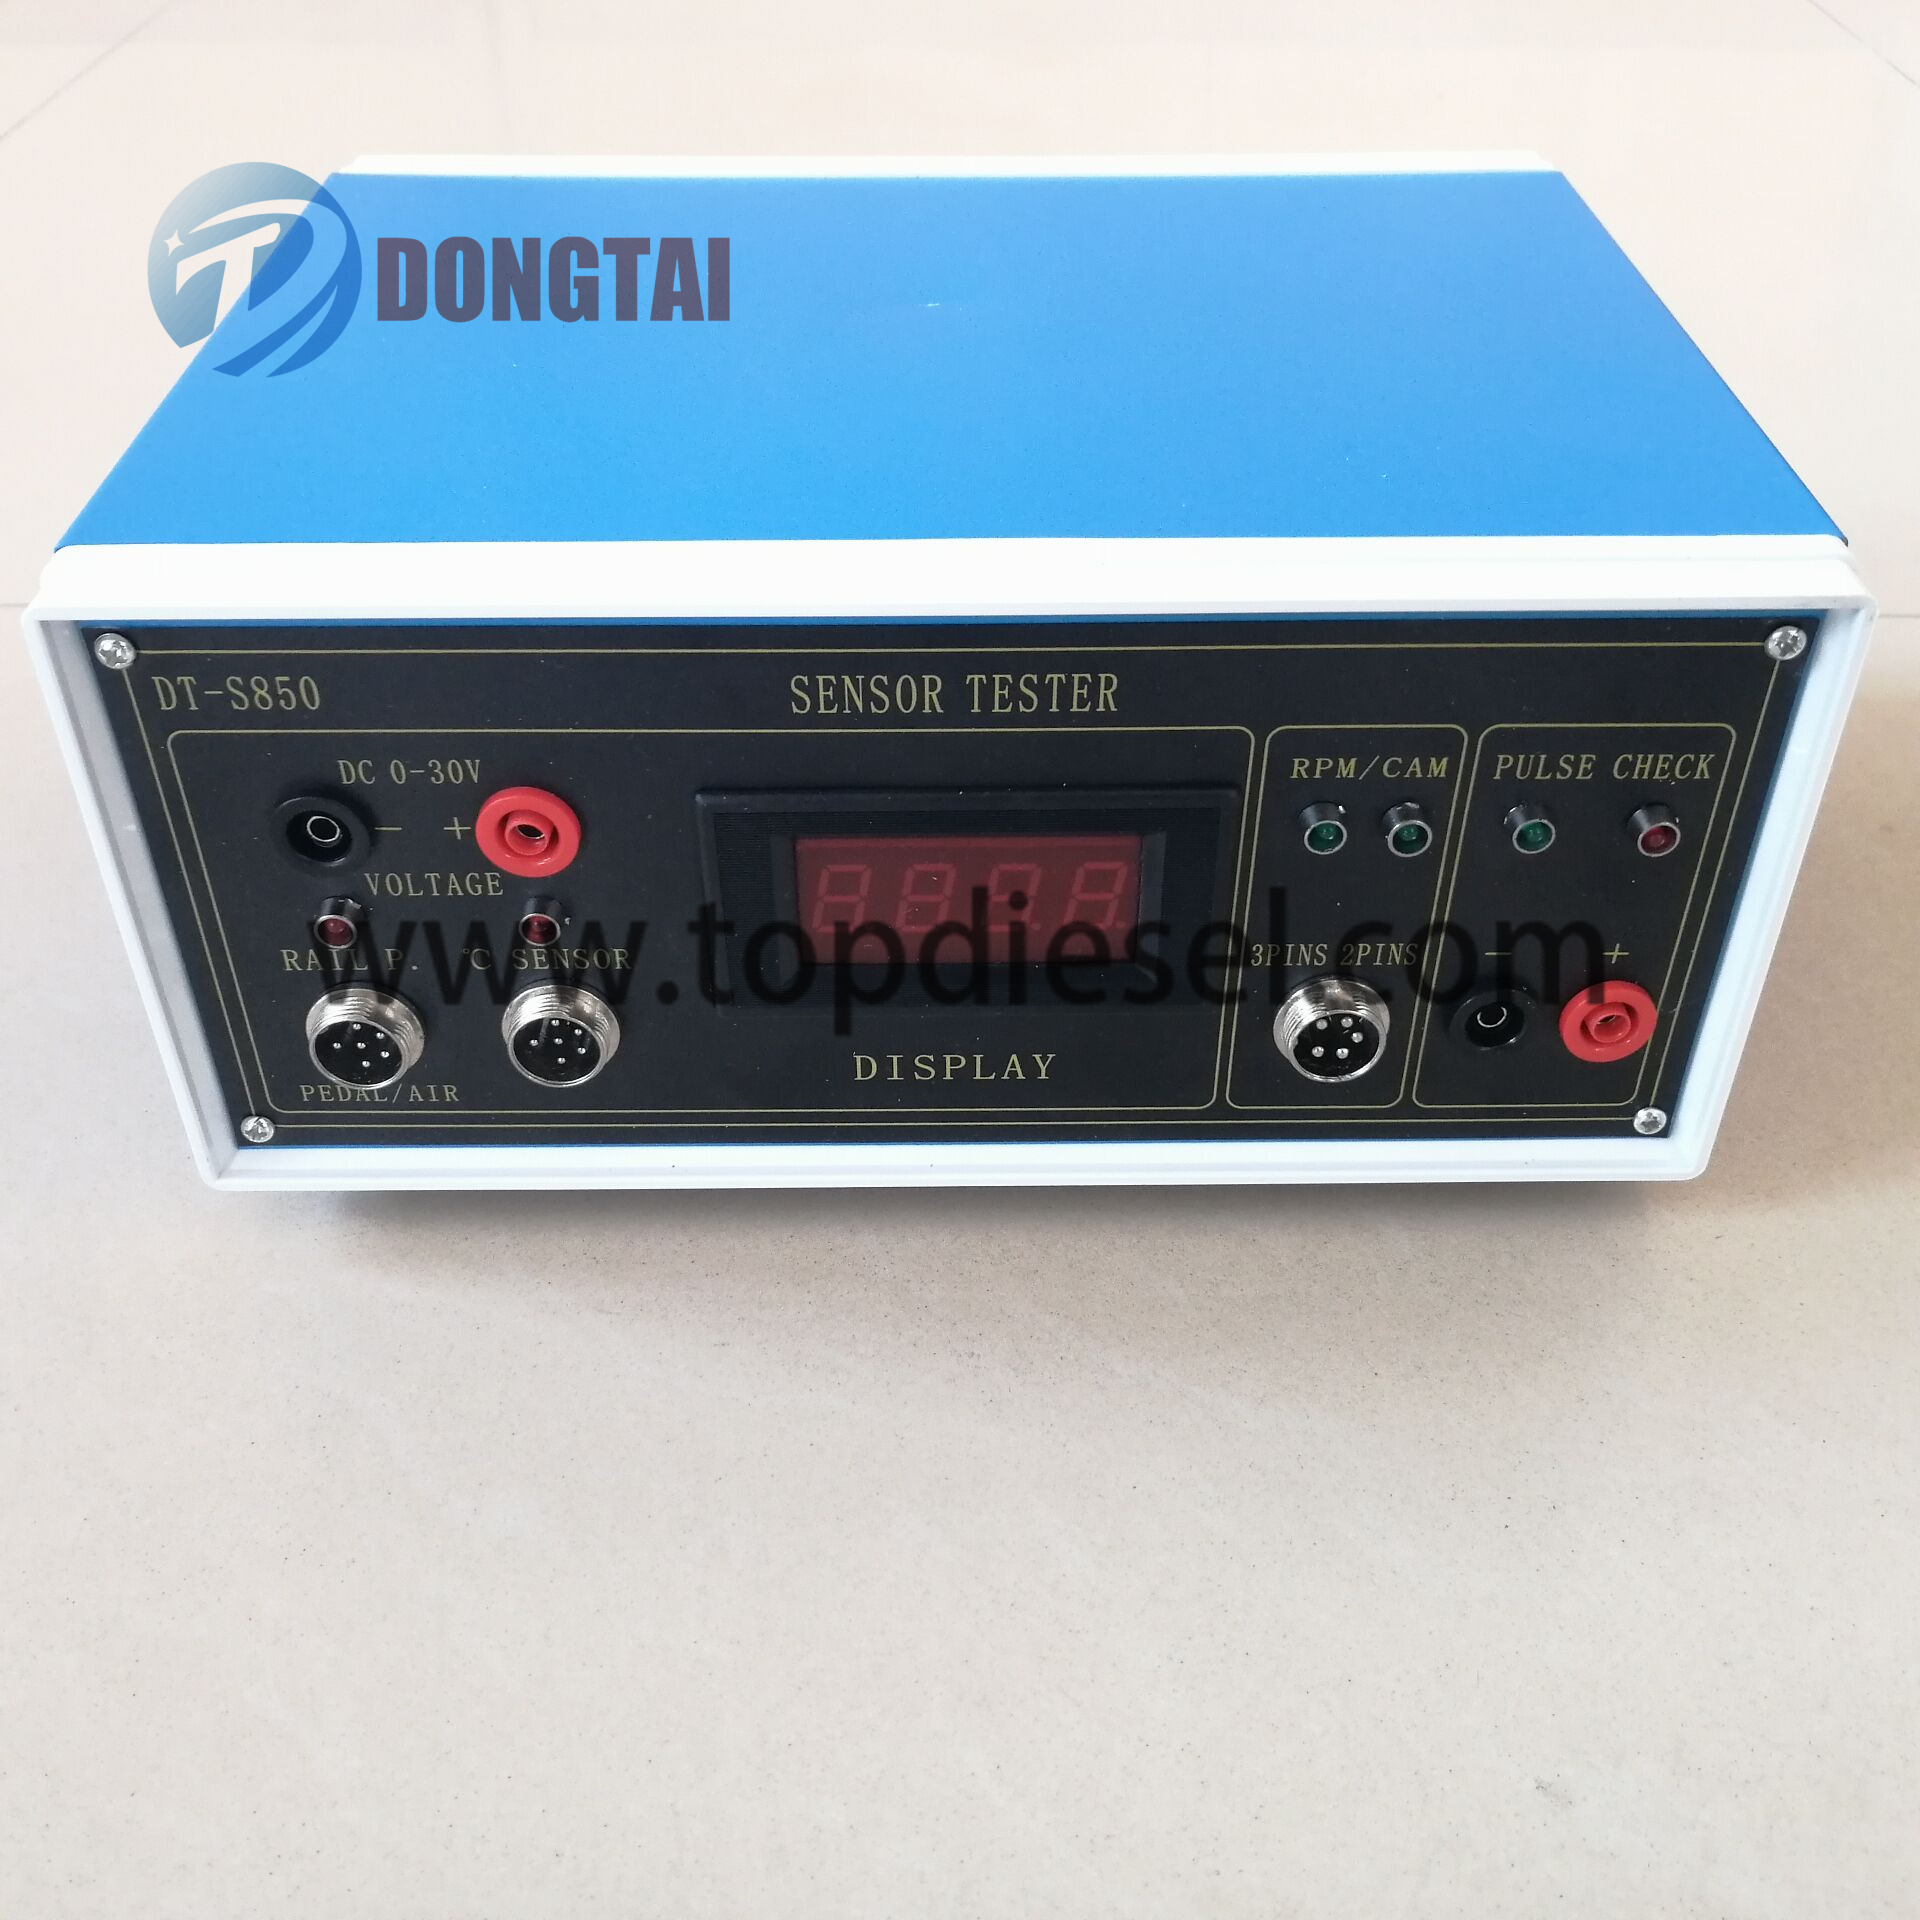 Fast delivery Pt Cummins Pump Test Stand - DT-S850 Sensor Tester – Dongtai